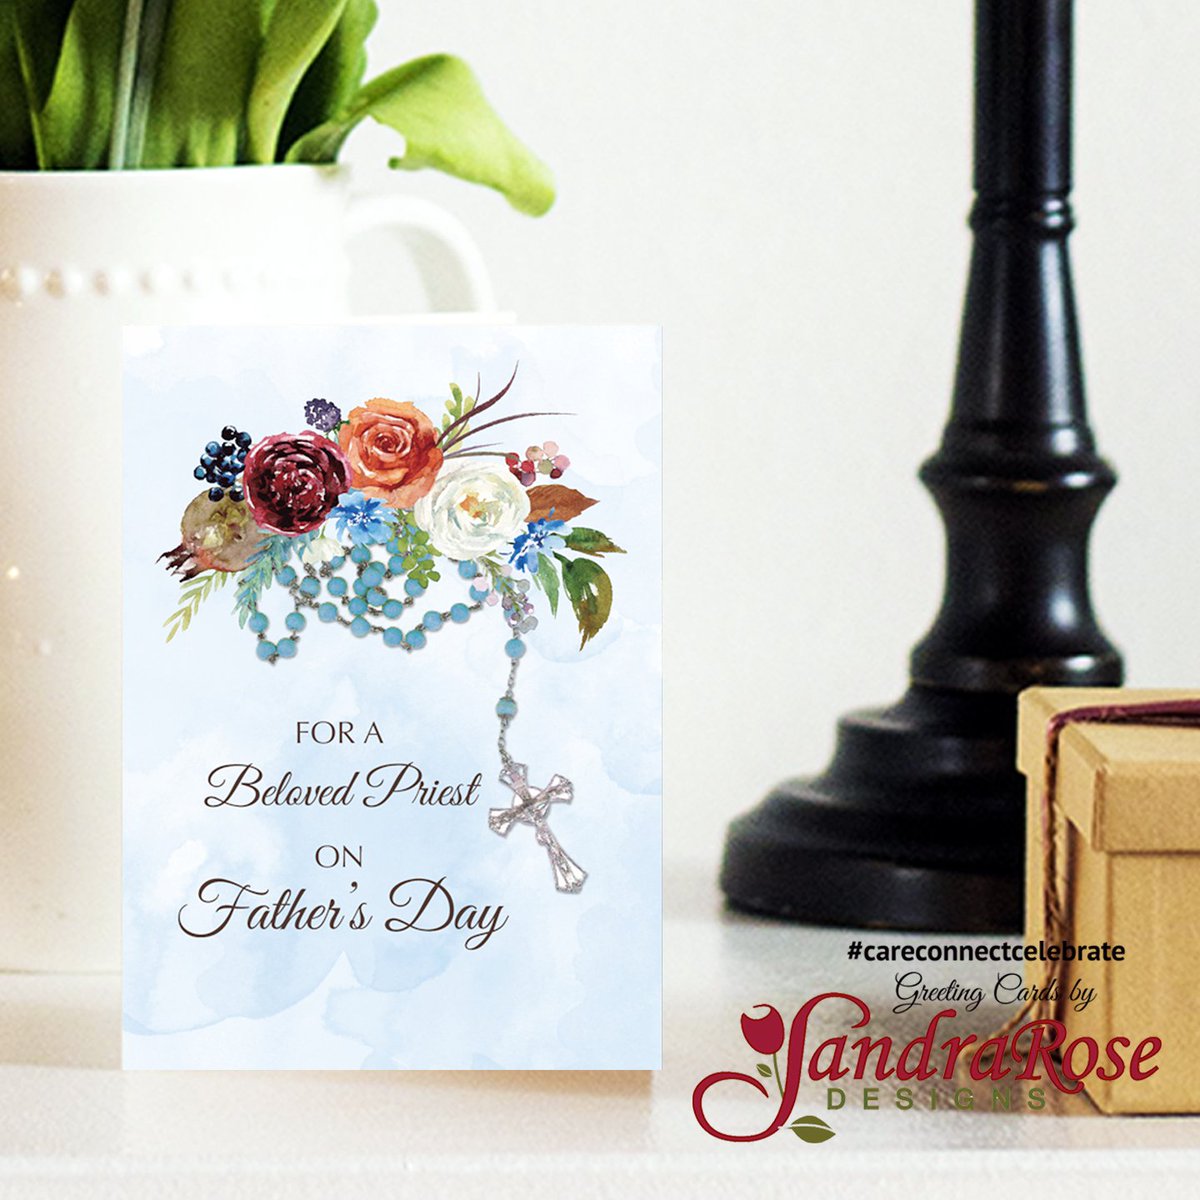 Celebrate Father's Day with a heartfelt tribute to the guiding light of the Catholic priesthood. This beautiful card features a serene depiction of a blue rosary. #CareConnectCelebrate #SandraRoseDesigns @GCUniverse #Greetingcards #Greetingcard greetingcarduniverse.com/holiday-cards/…